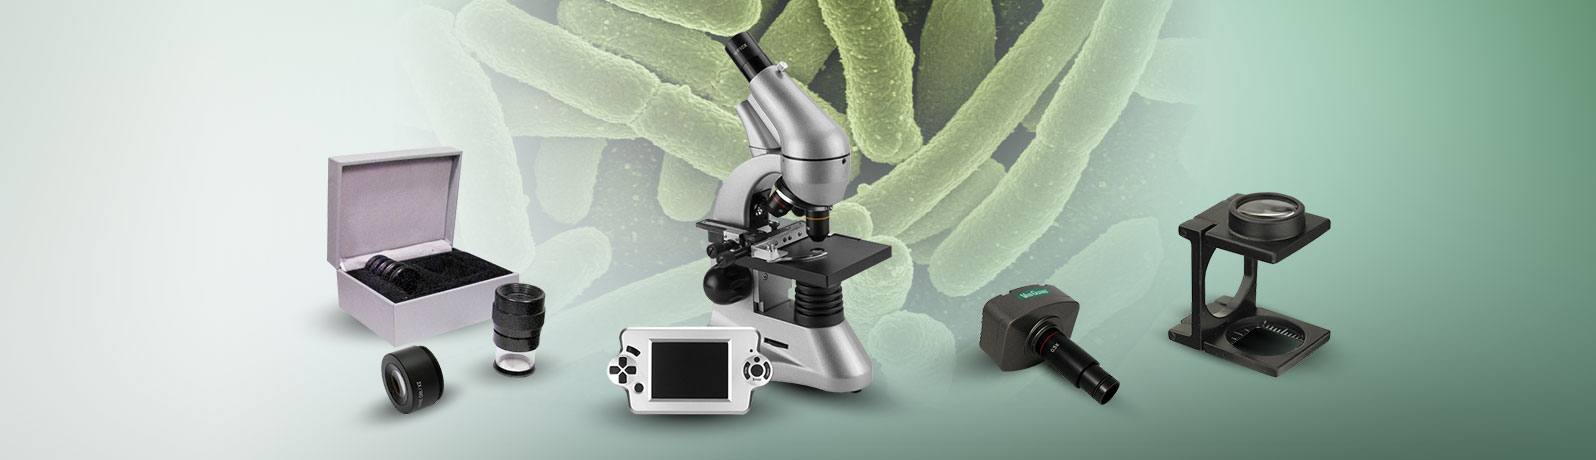 microscopes-magnifiers